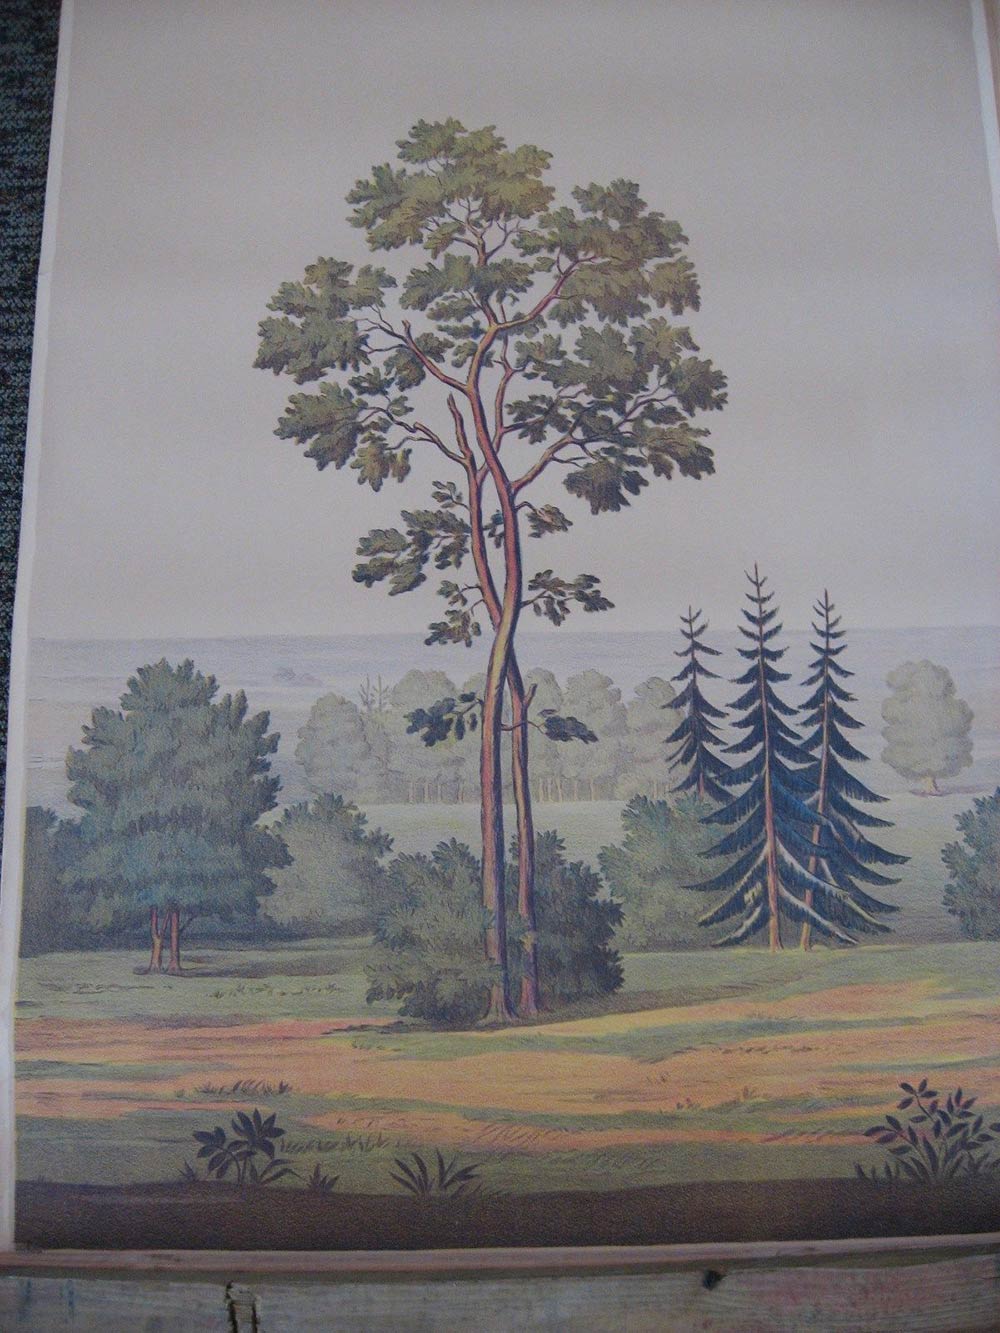 wallpaper murals for sale,tree,painting,woody plant,plant,acrylic paint